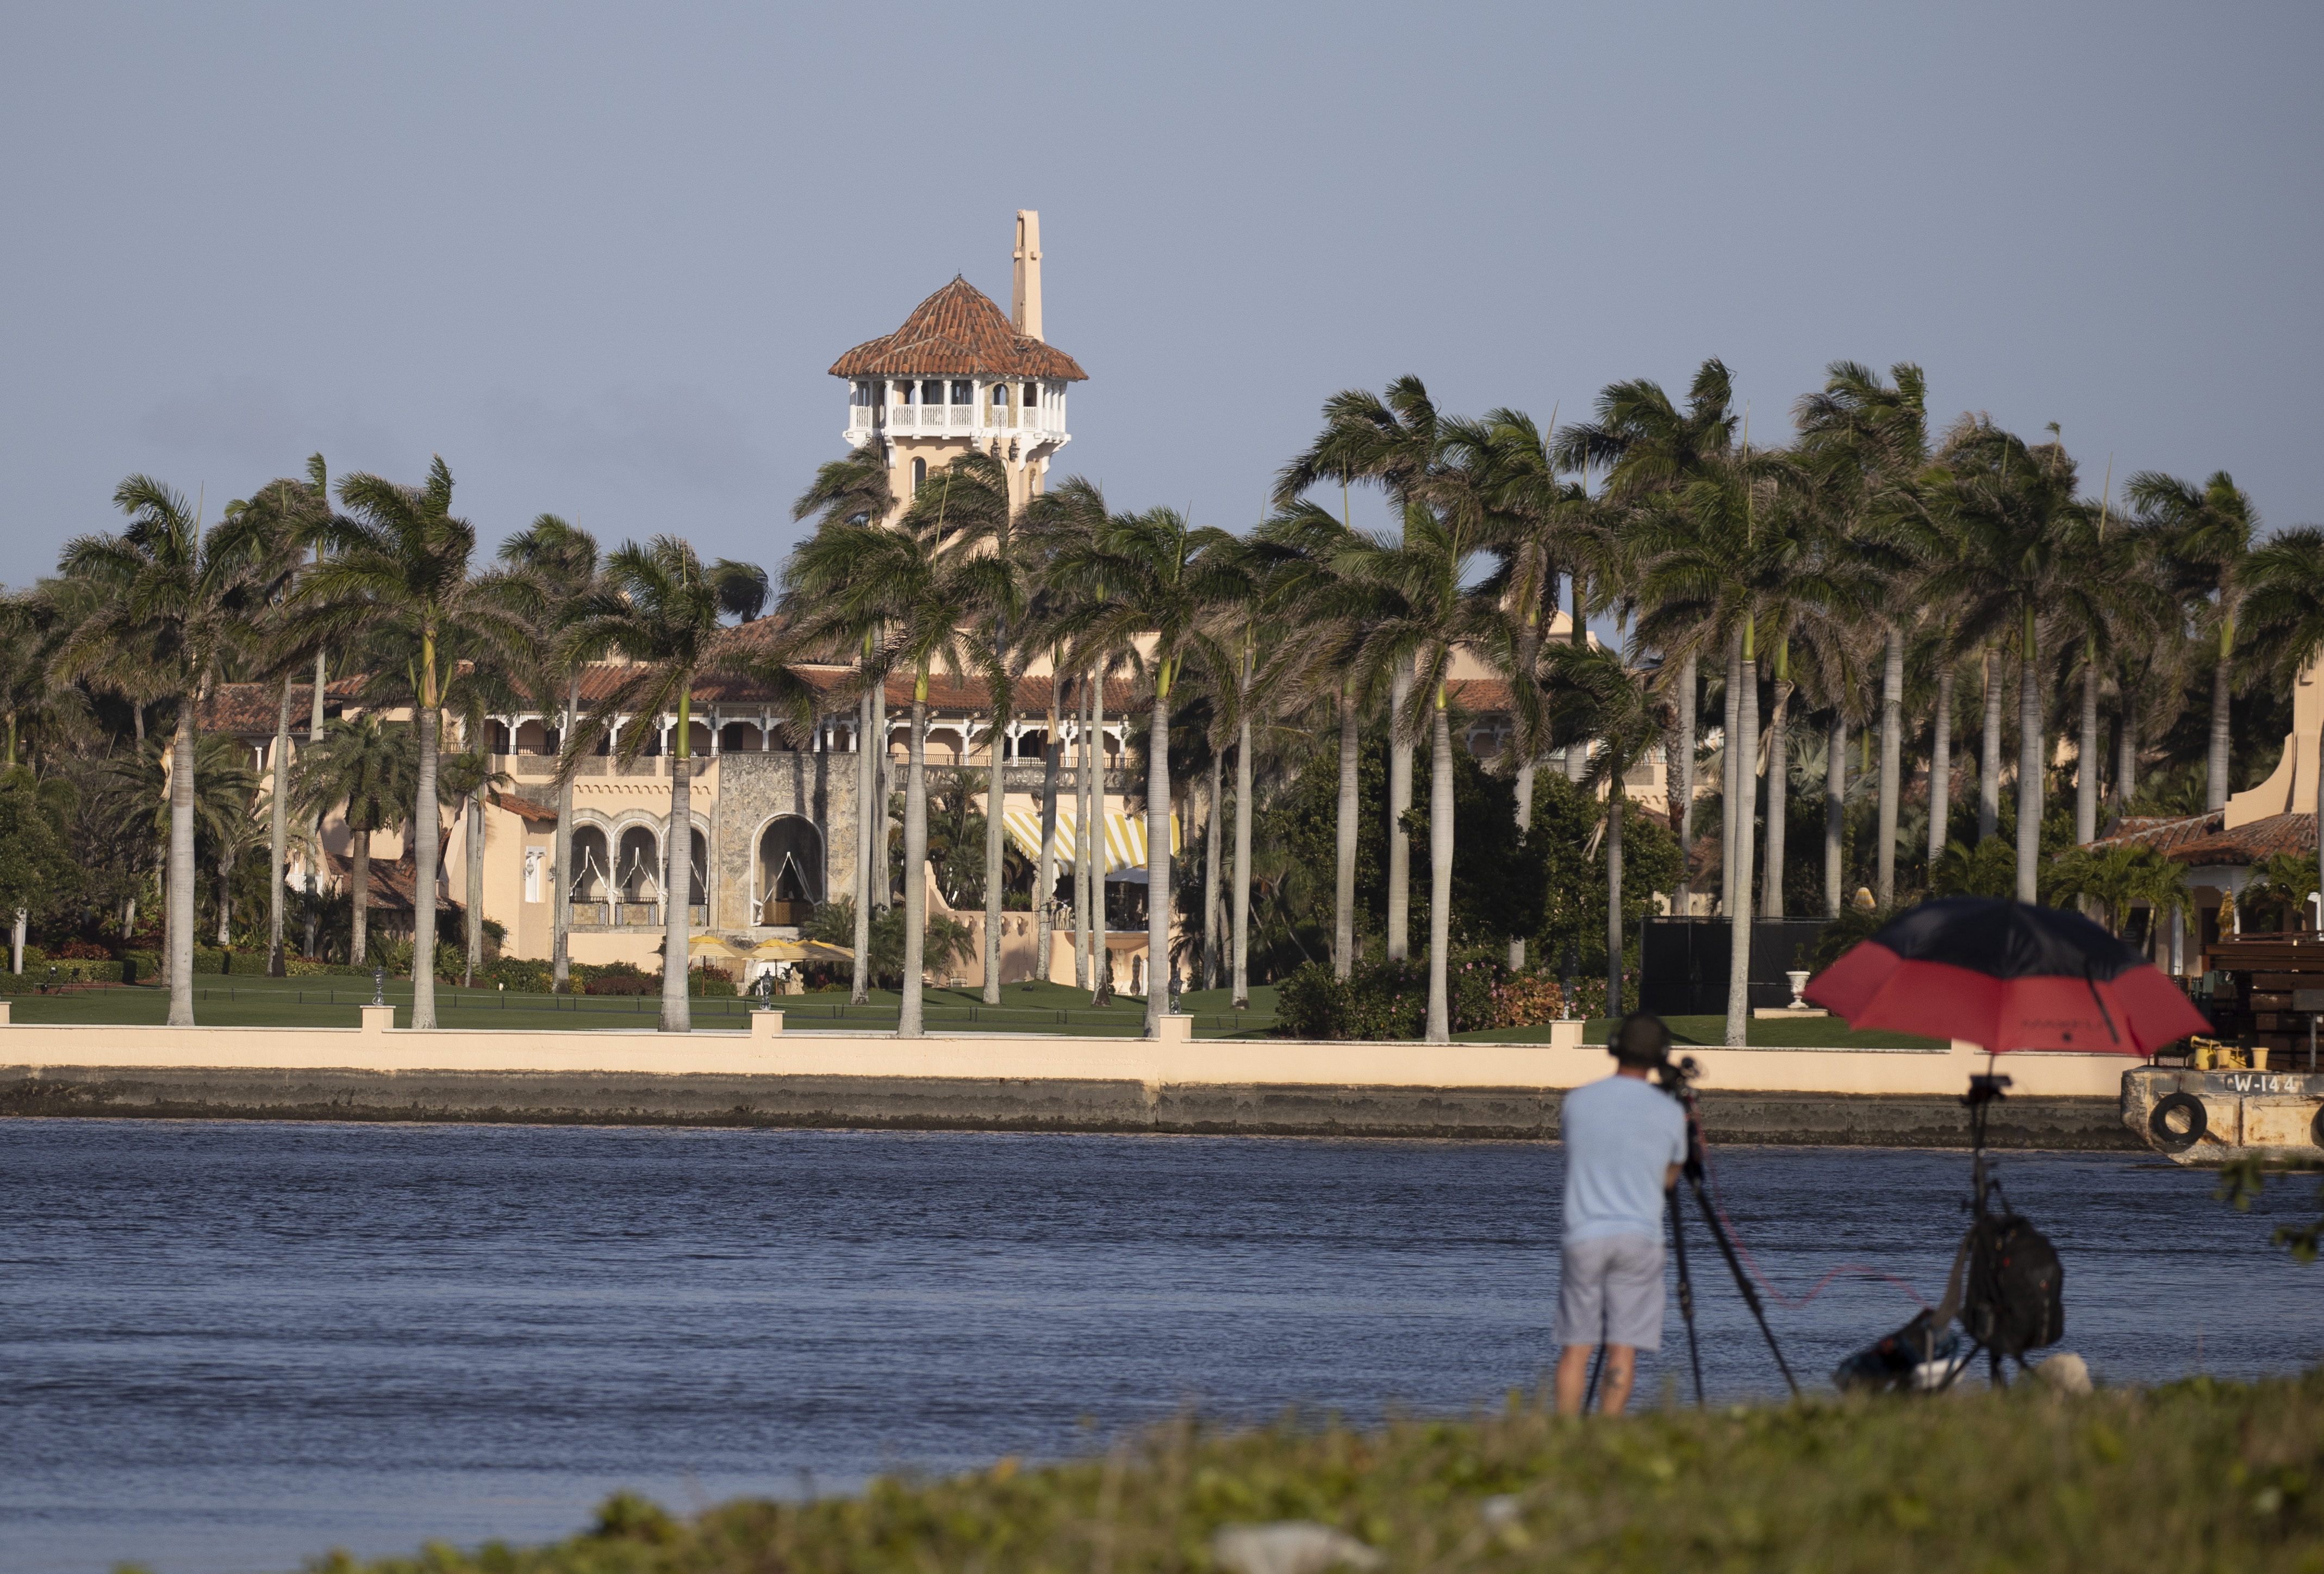 Mar-a-Lago in Palm Beach, Florida, as seen from across the Intracoastal Waterway. A man stands in the foreground with a camera on a tripod.